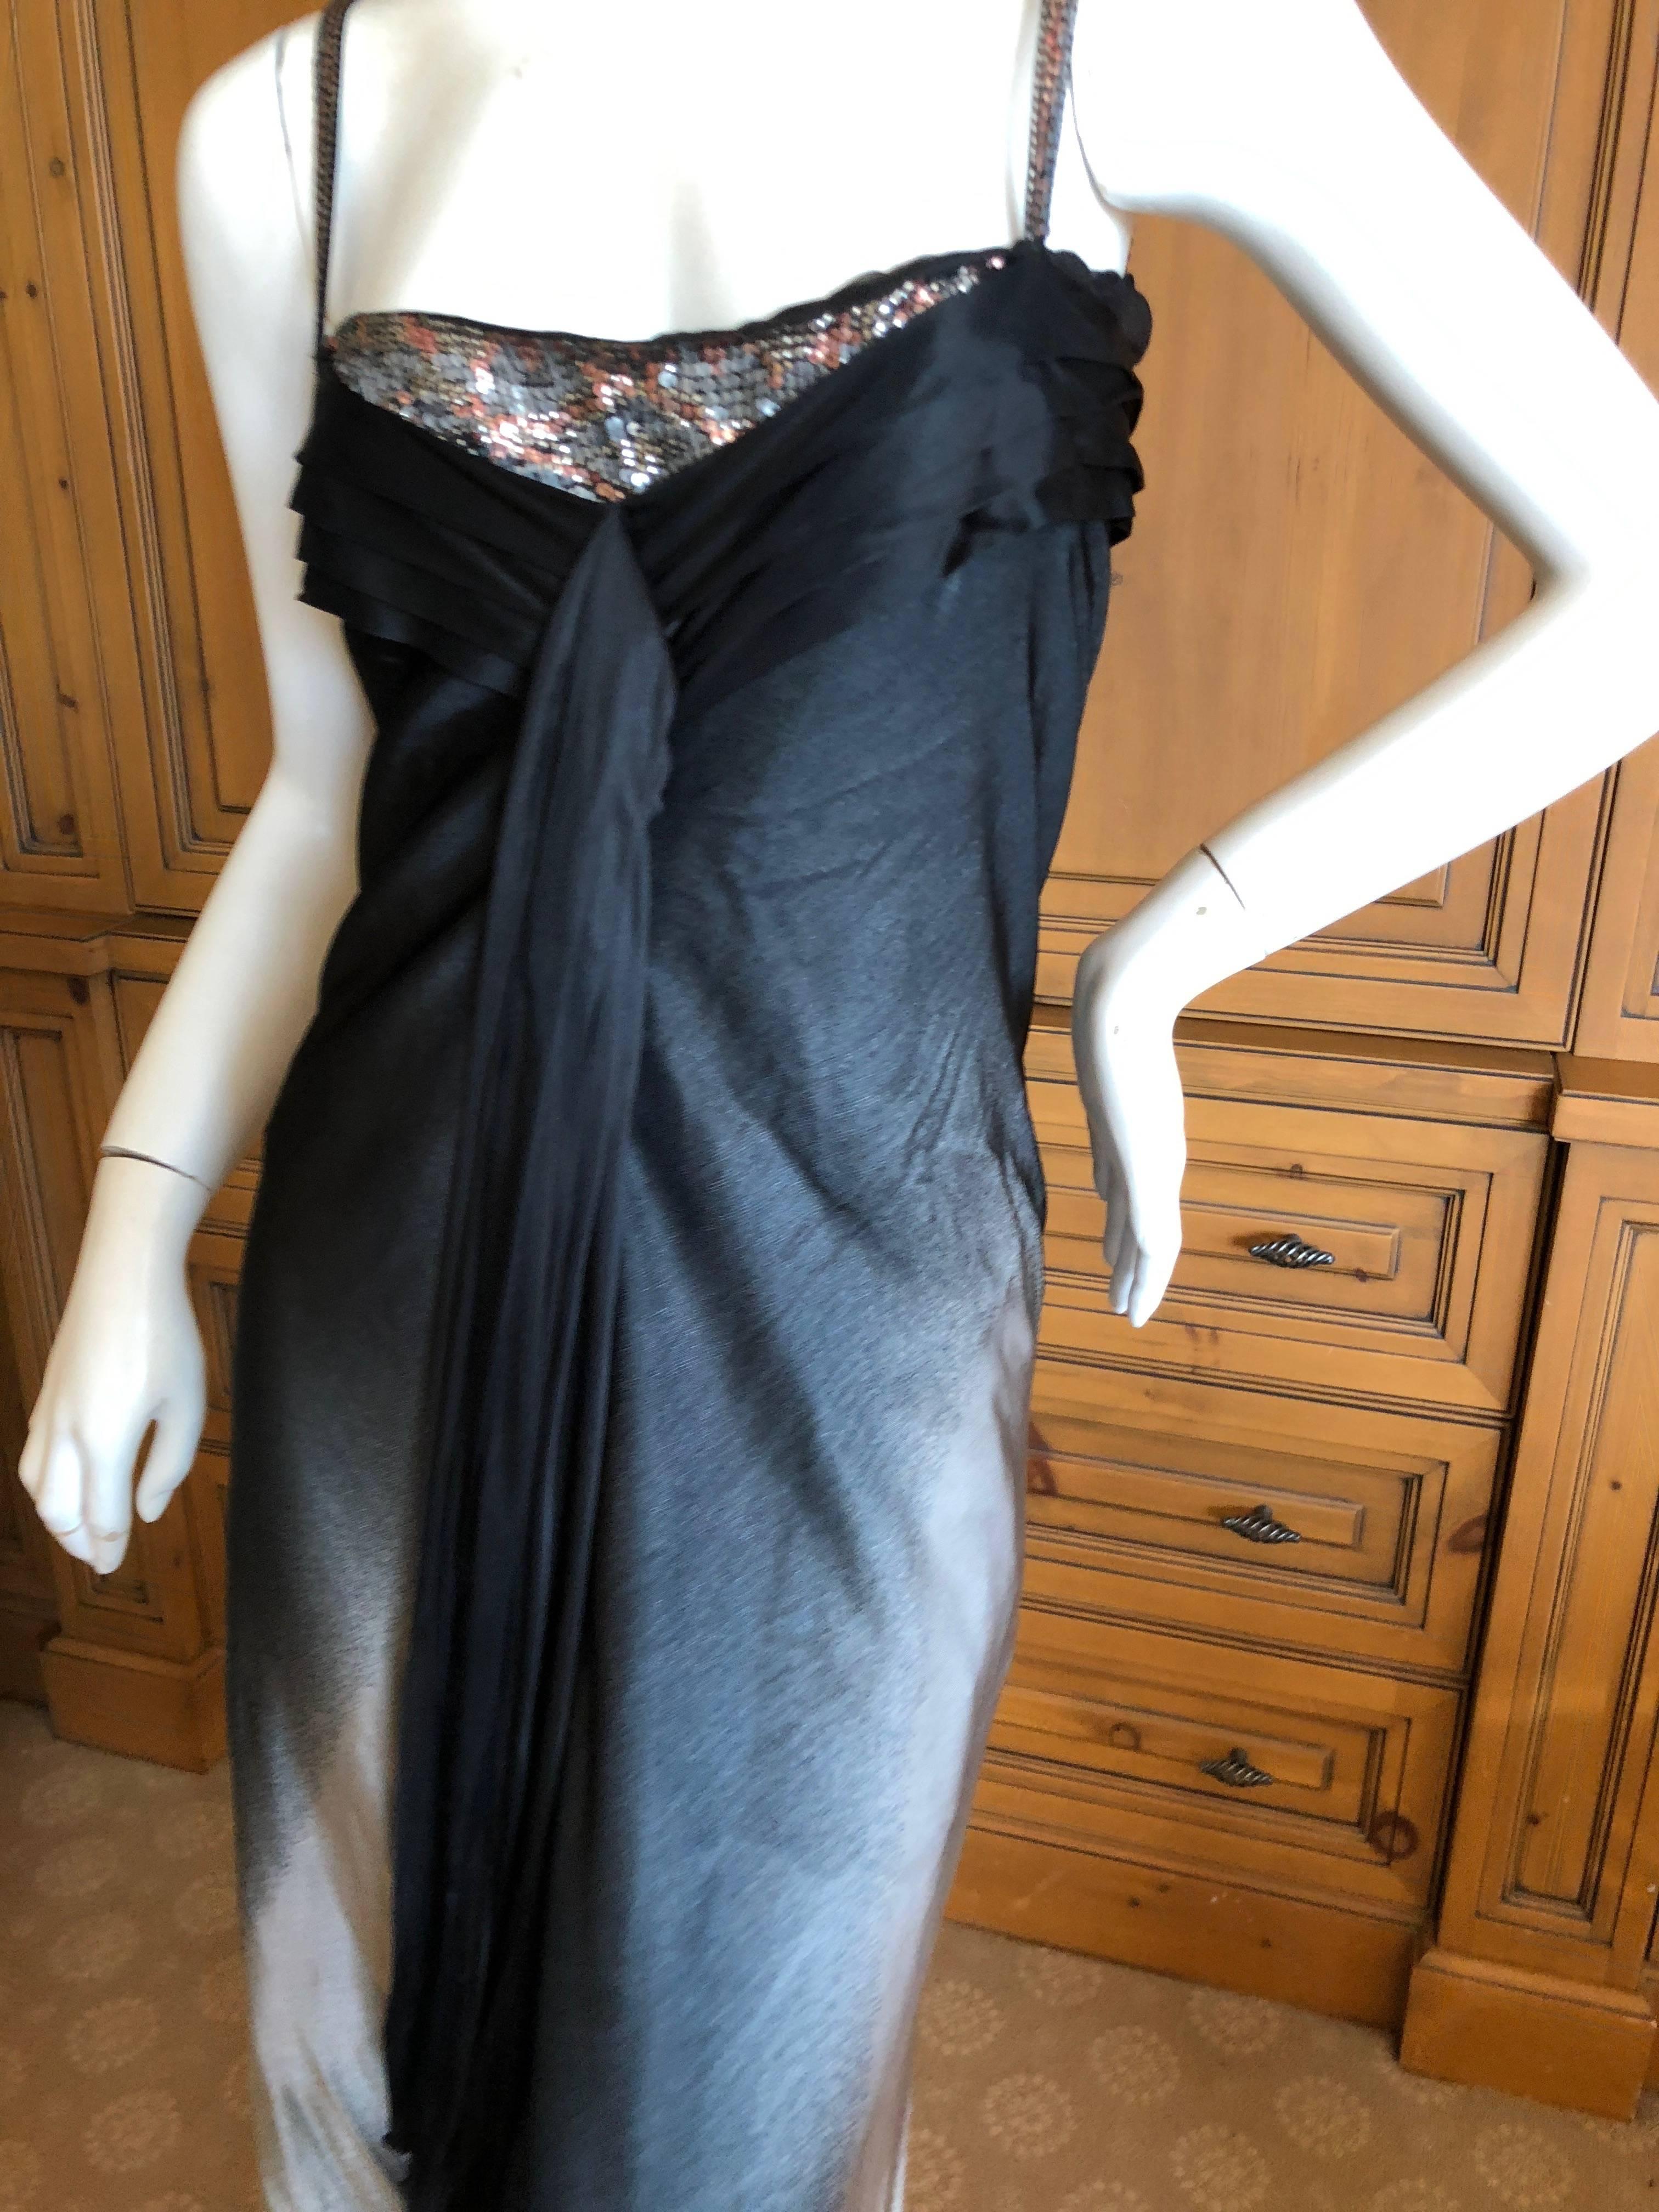 Christian Lacroix Silver and Black Vintage Silk Evening Dress with Sequin Detail For Sale 1